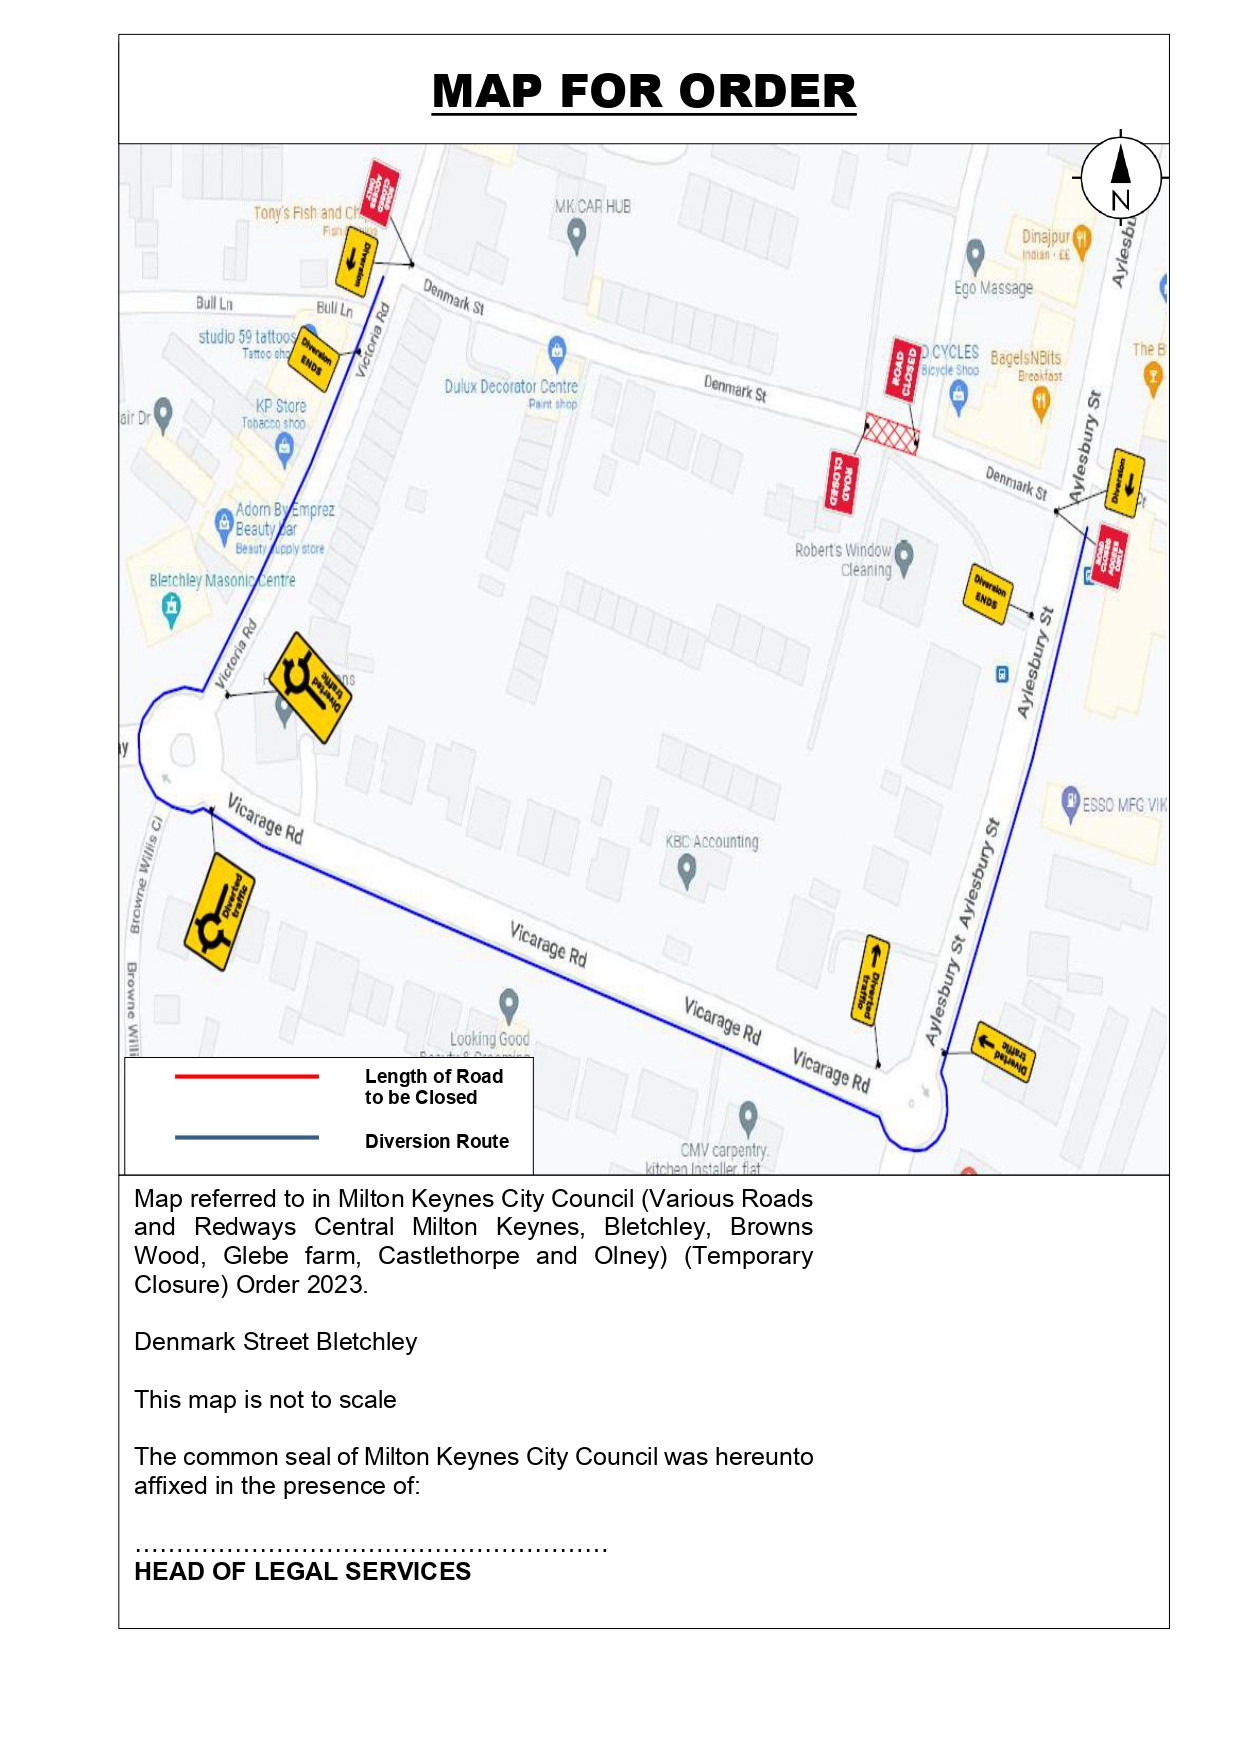 Alternative route for closure of Denmark Street 31 July 2023 to 02 August 2023